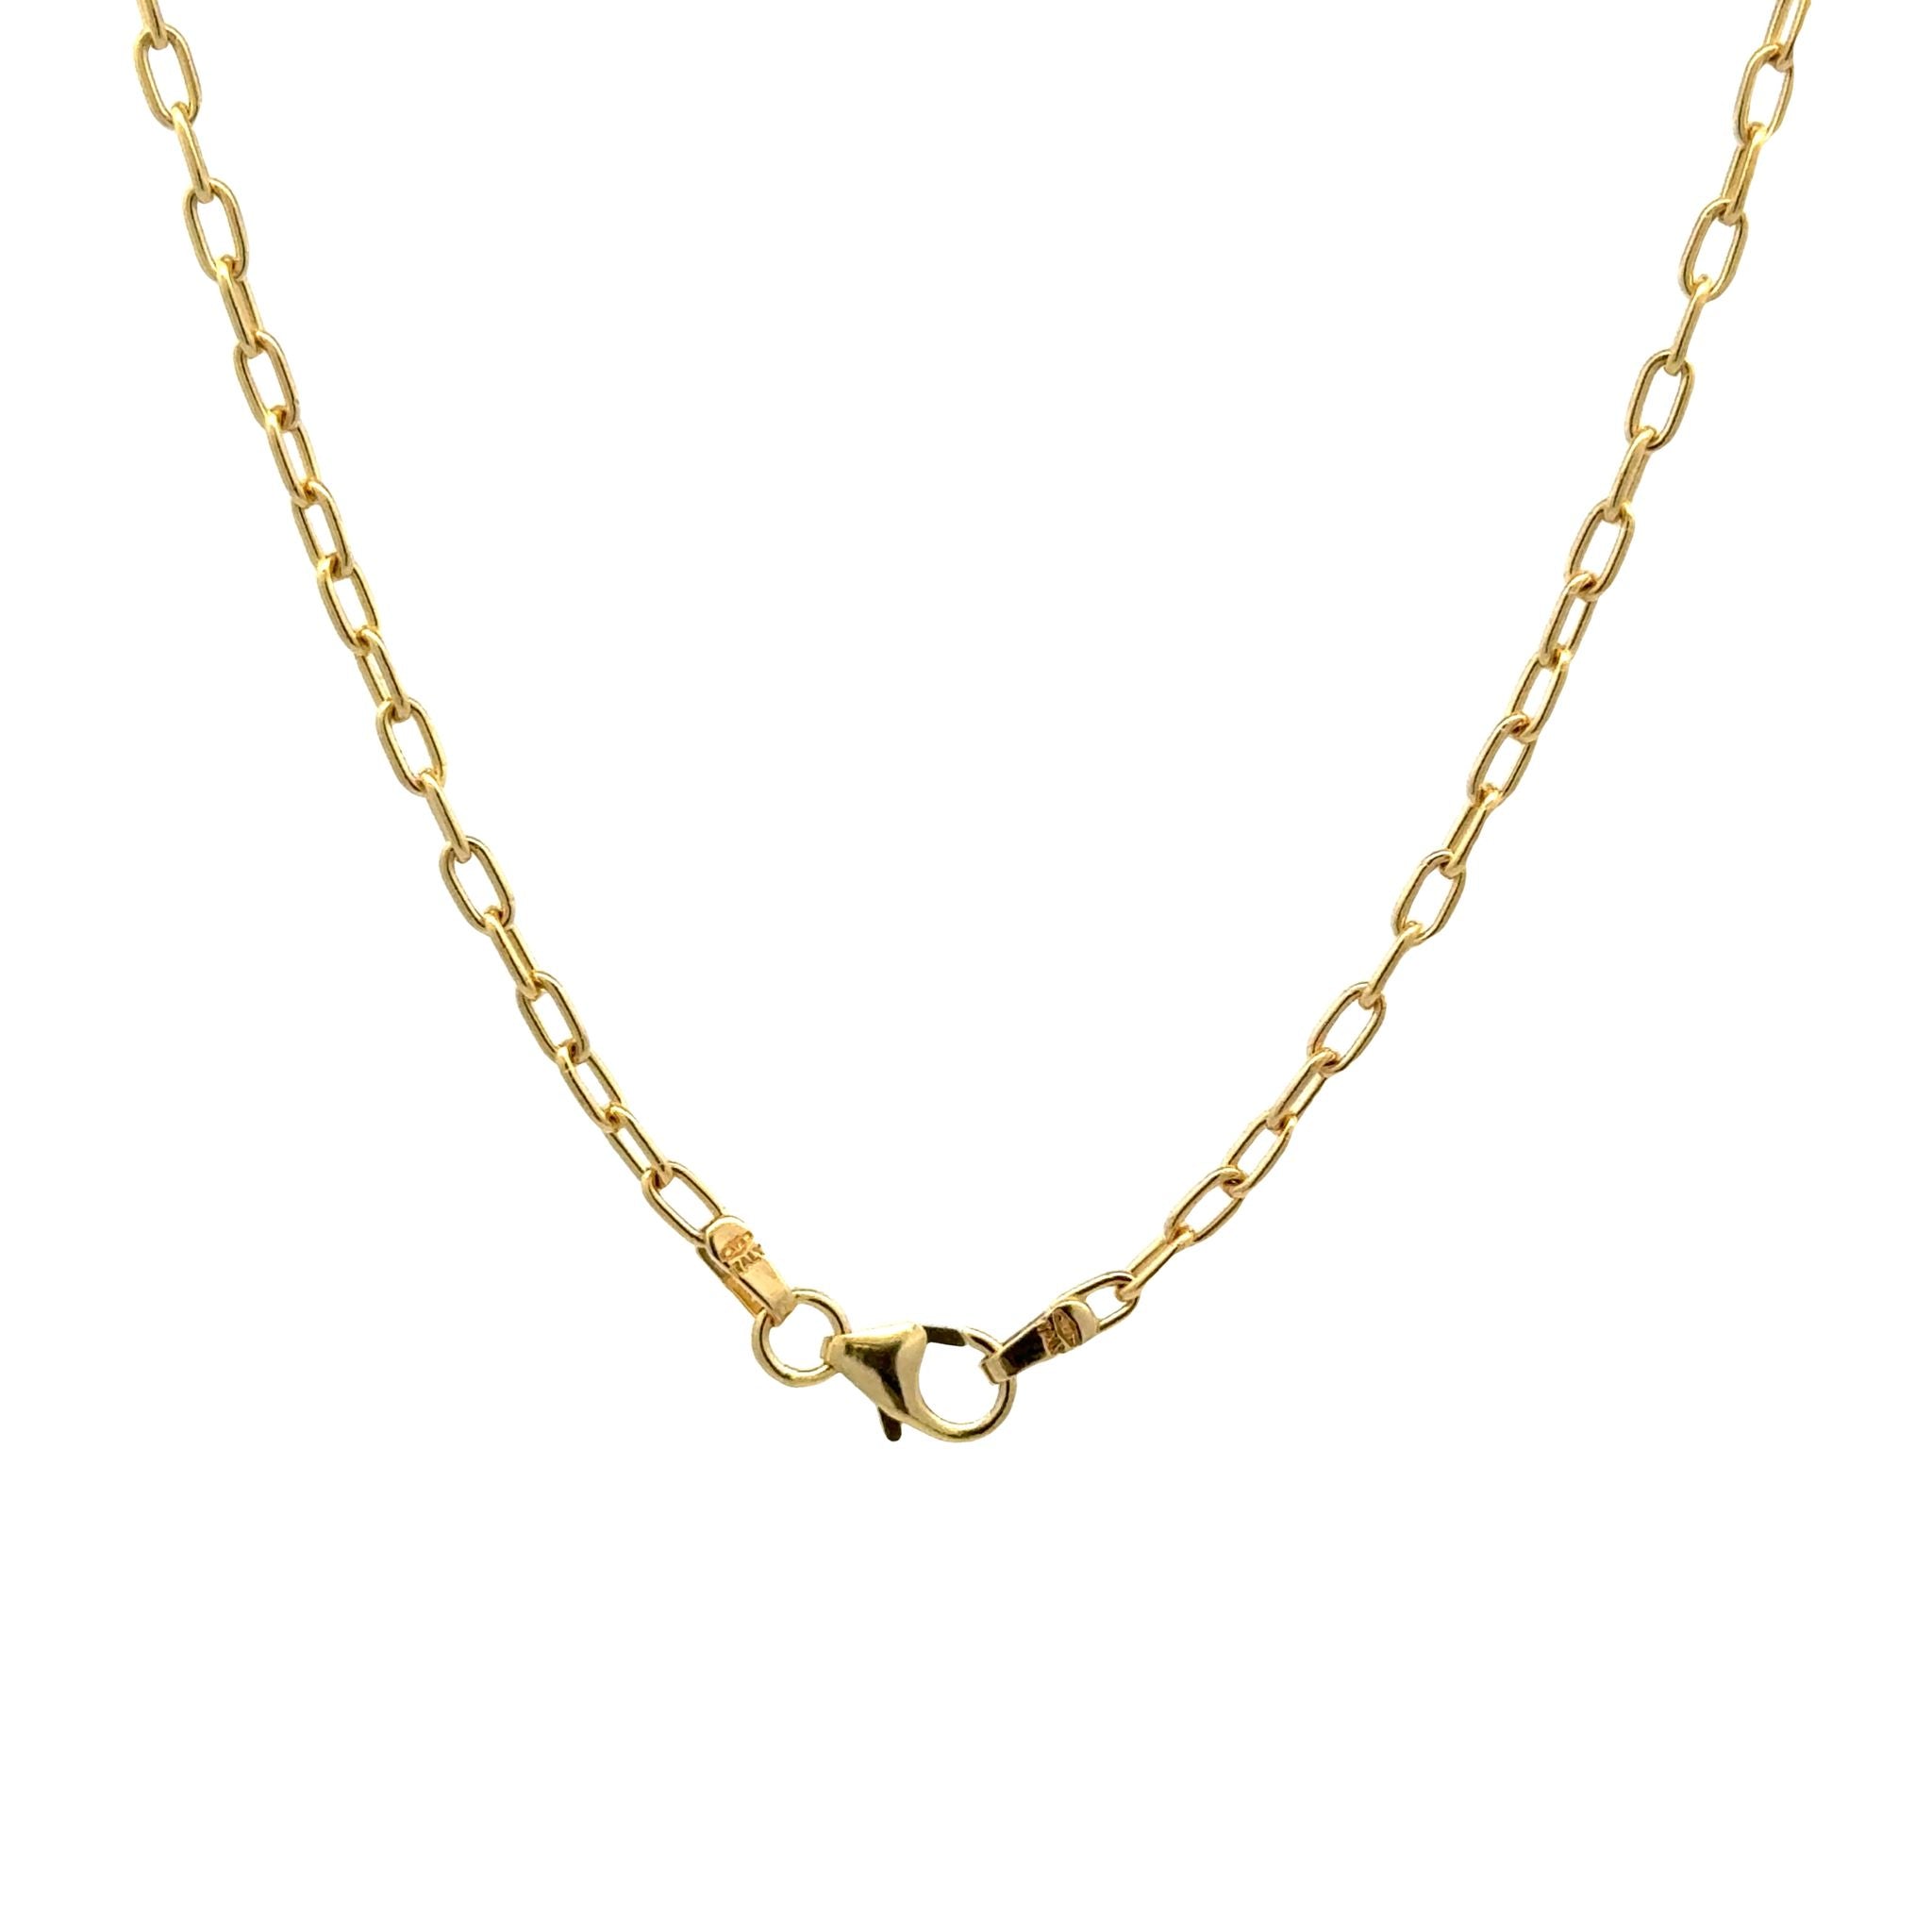 9K Yellow Gold Polished 50cm Elongated Trace Chain 2.3mm